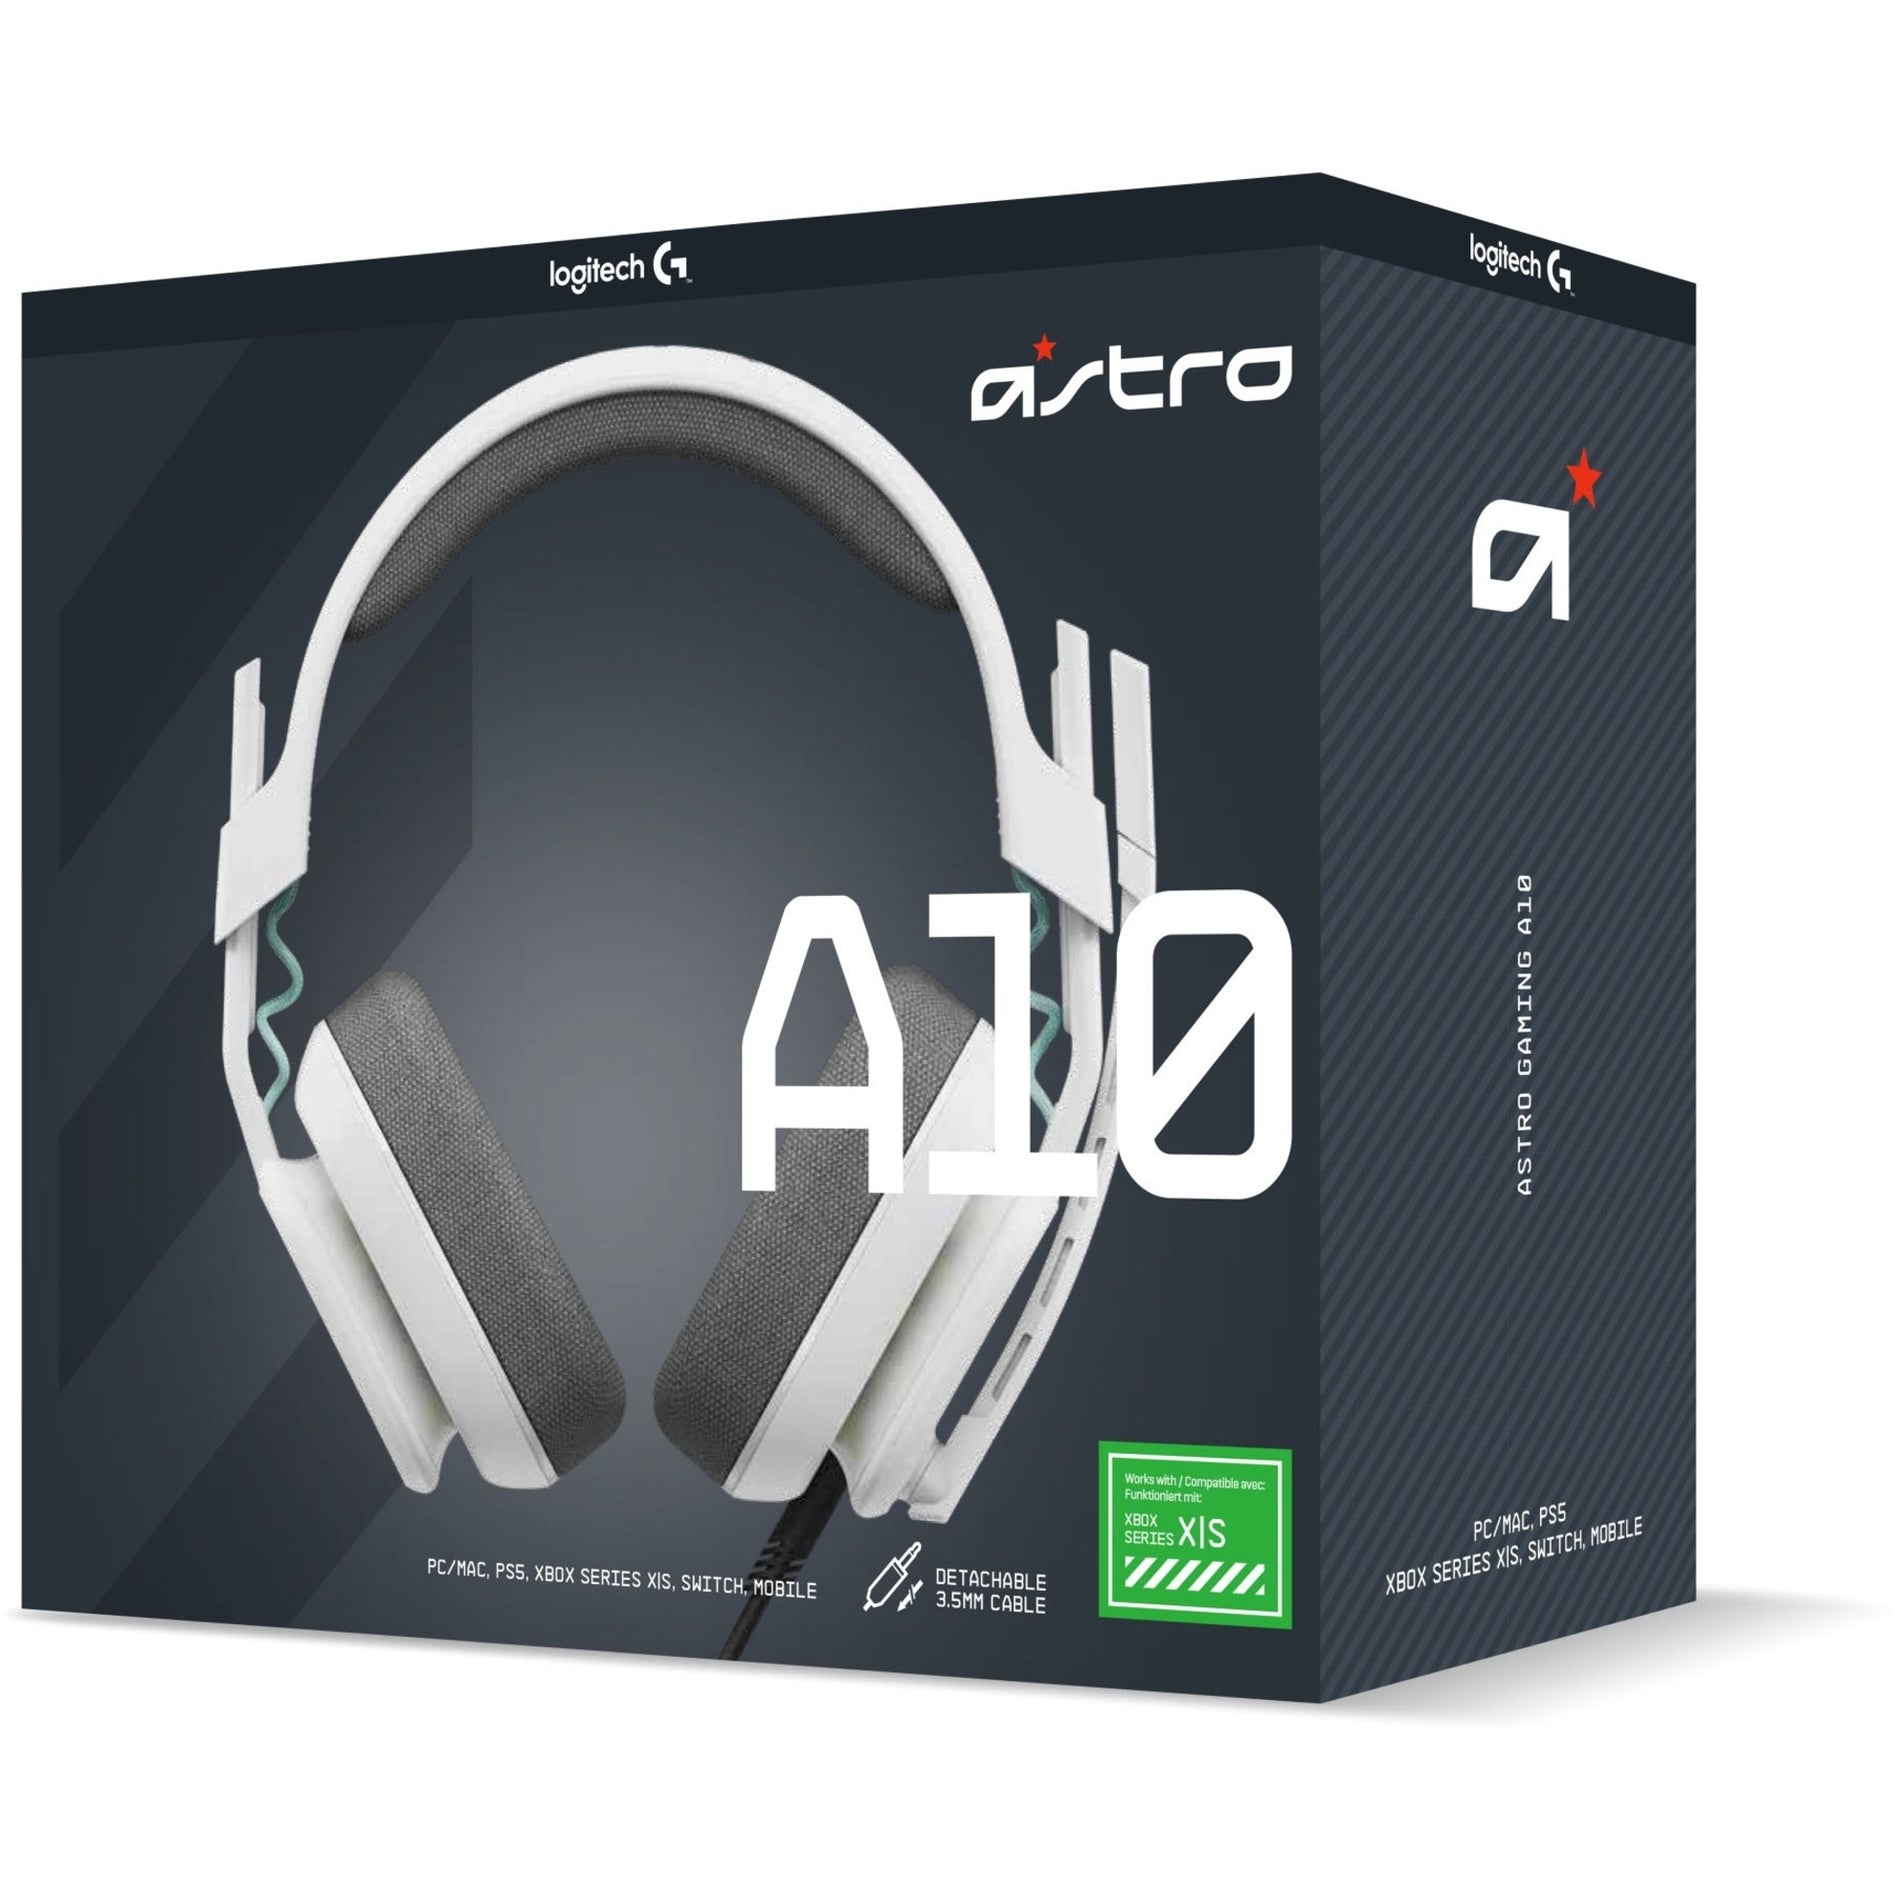 Astro 939-002050 A10 Headset Xbox - White, Durable, Uni-directional Microphone, Wired Gaming Headset